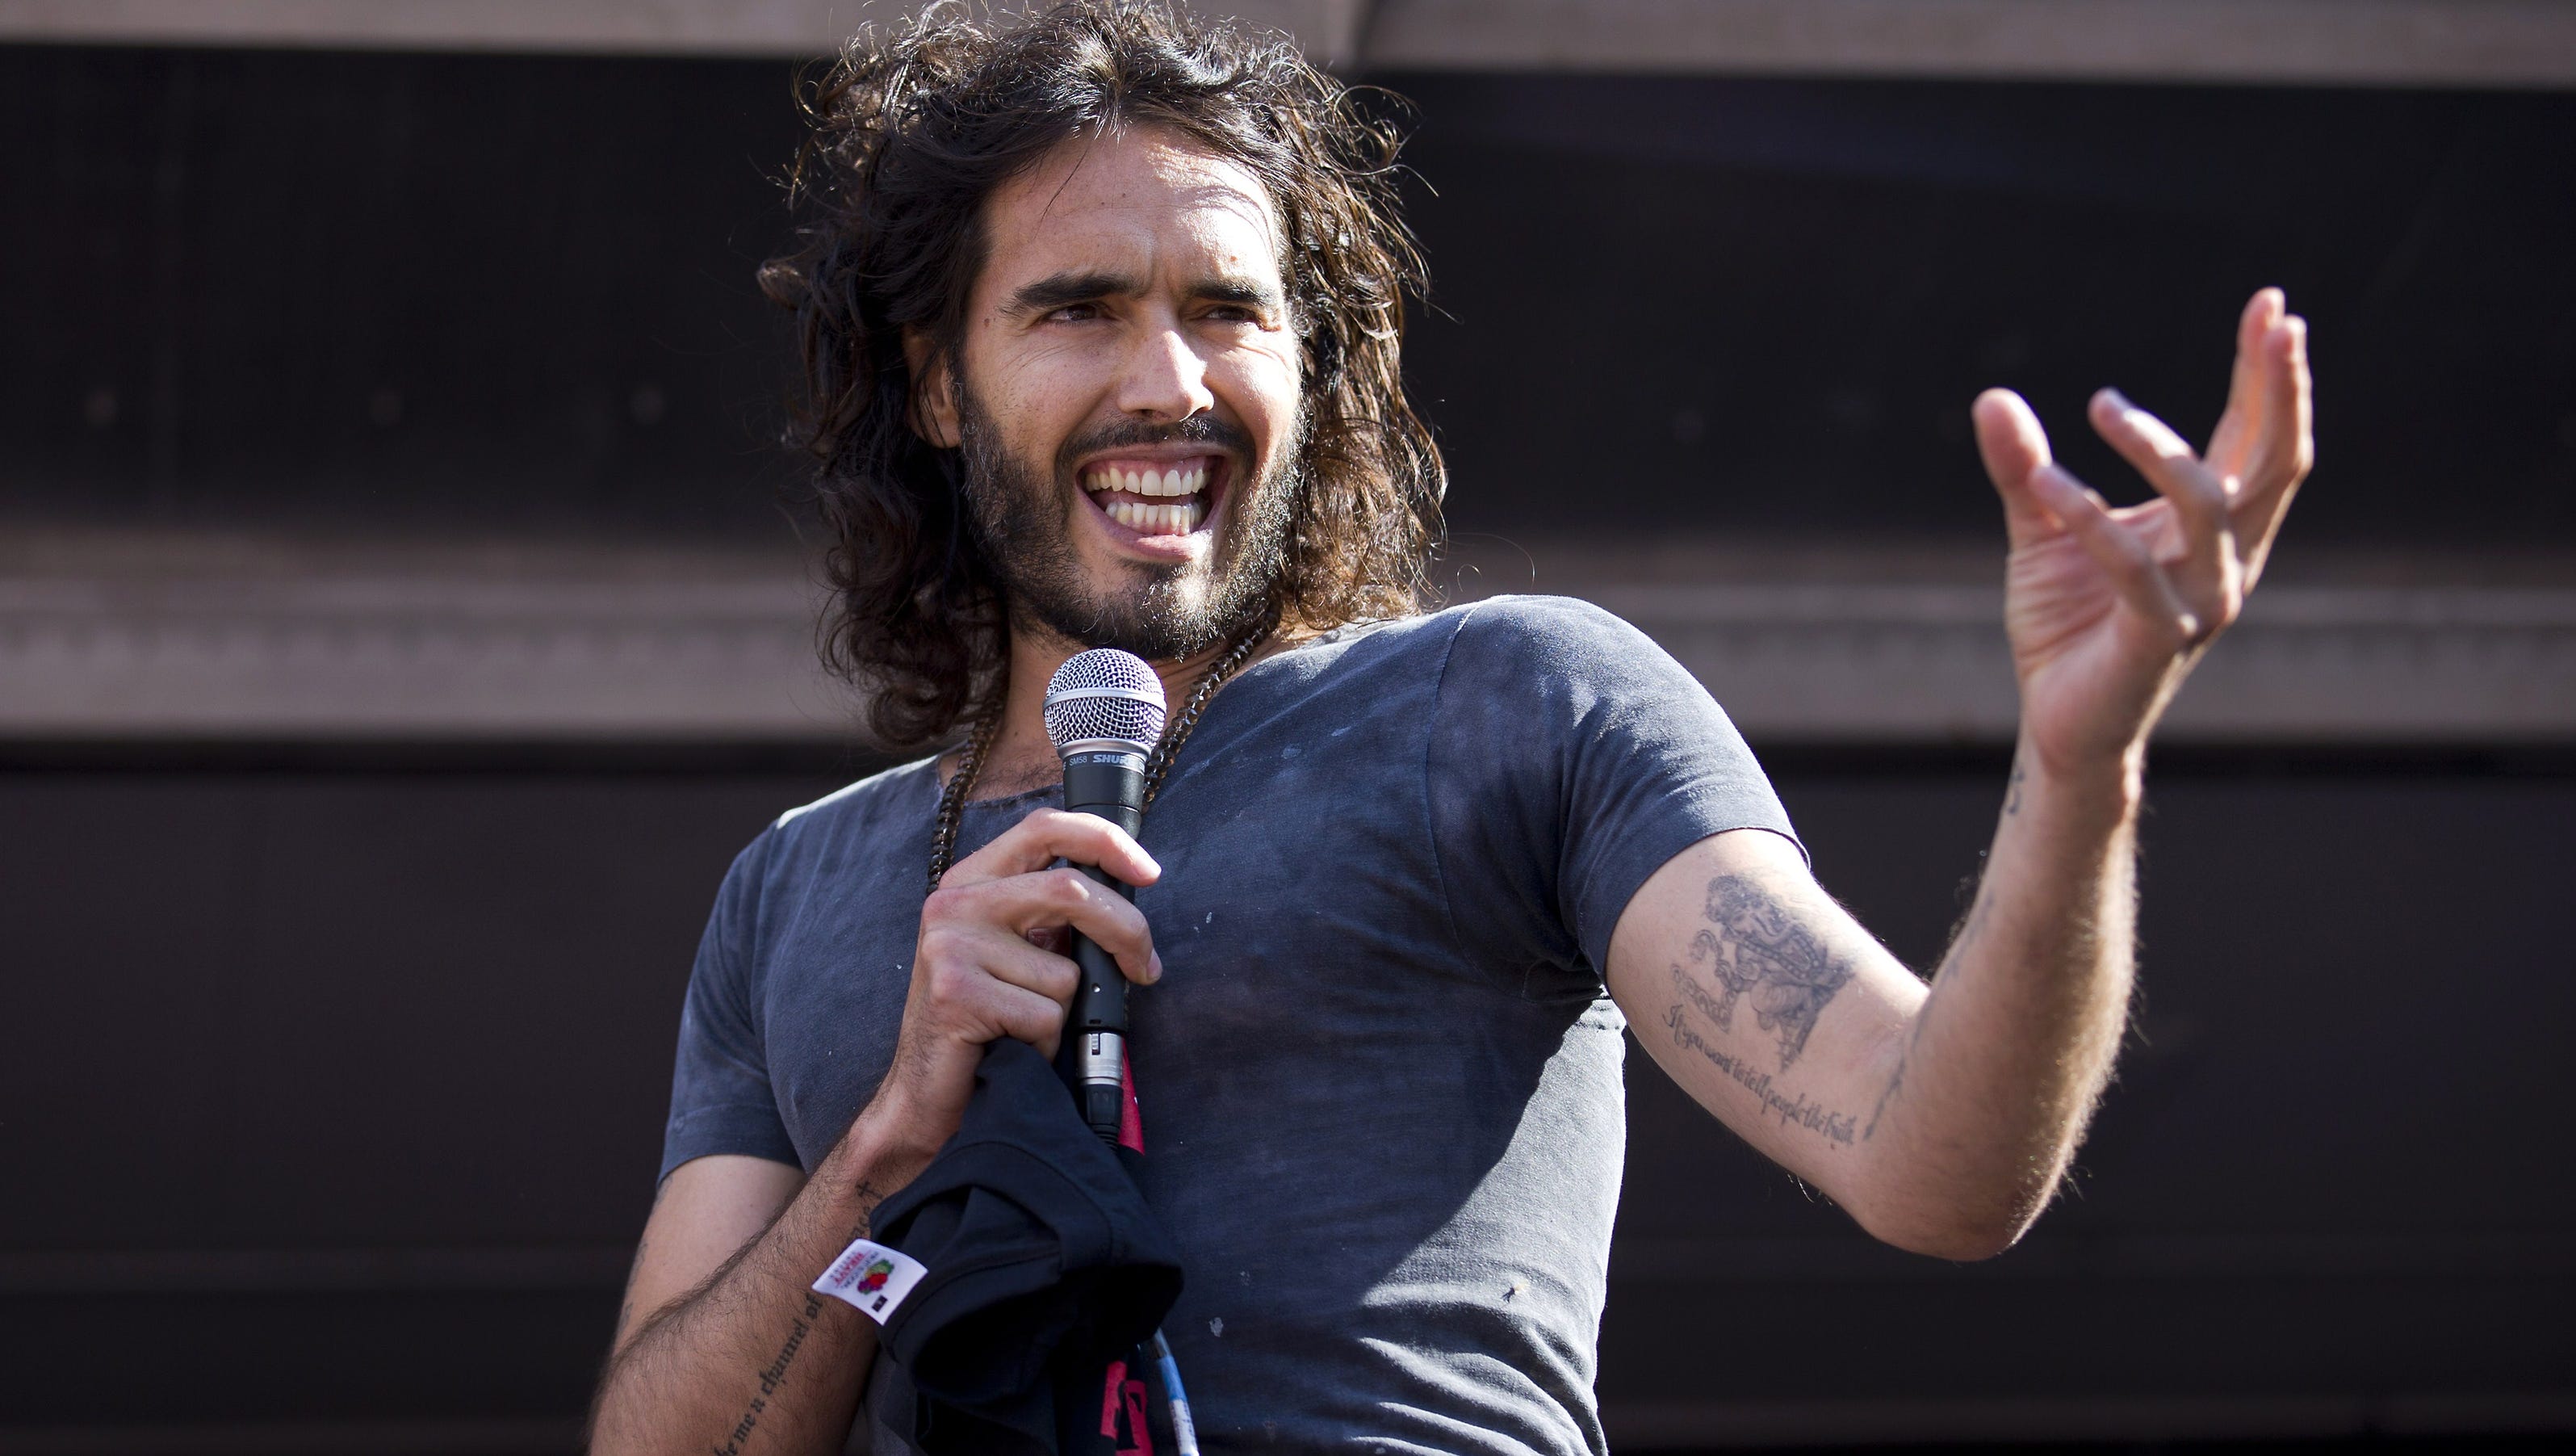 Russell Brand vedettes comme Anti porno Crusader